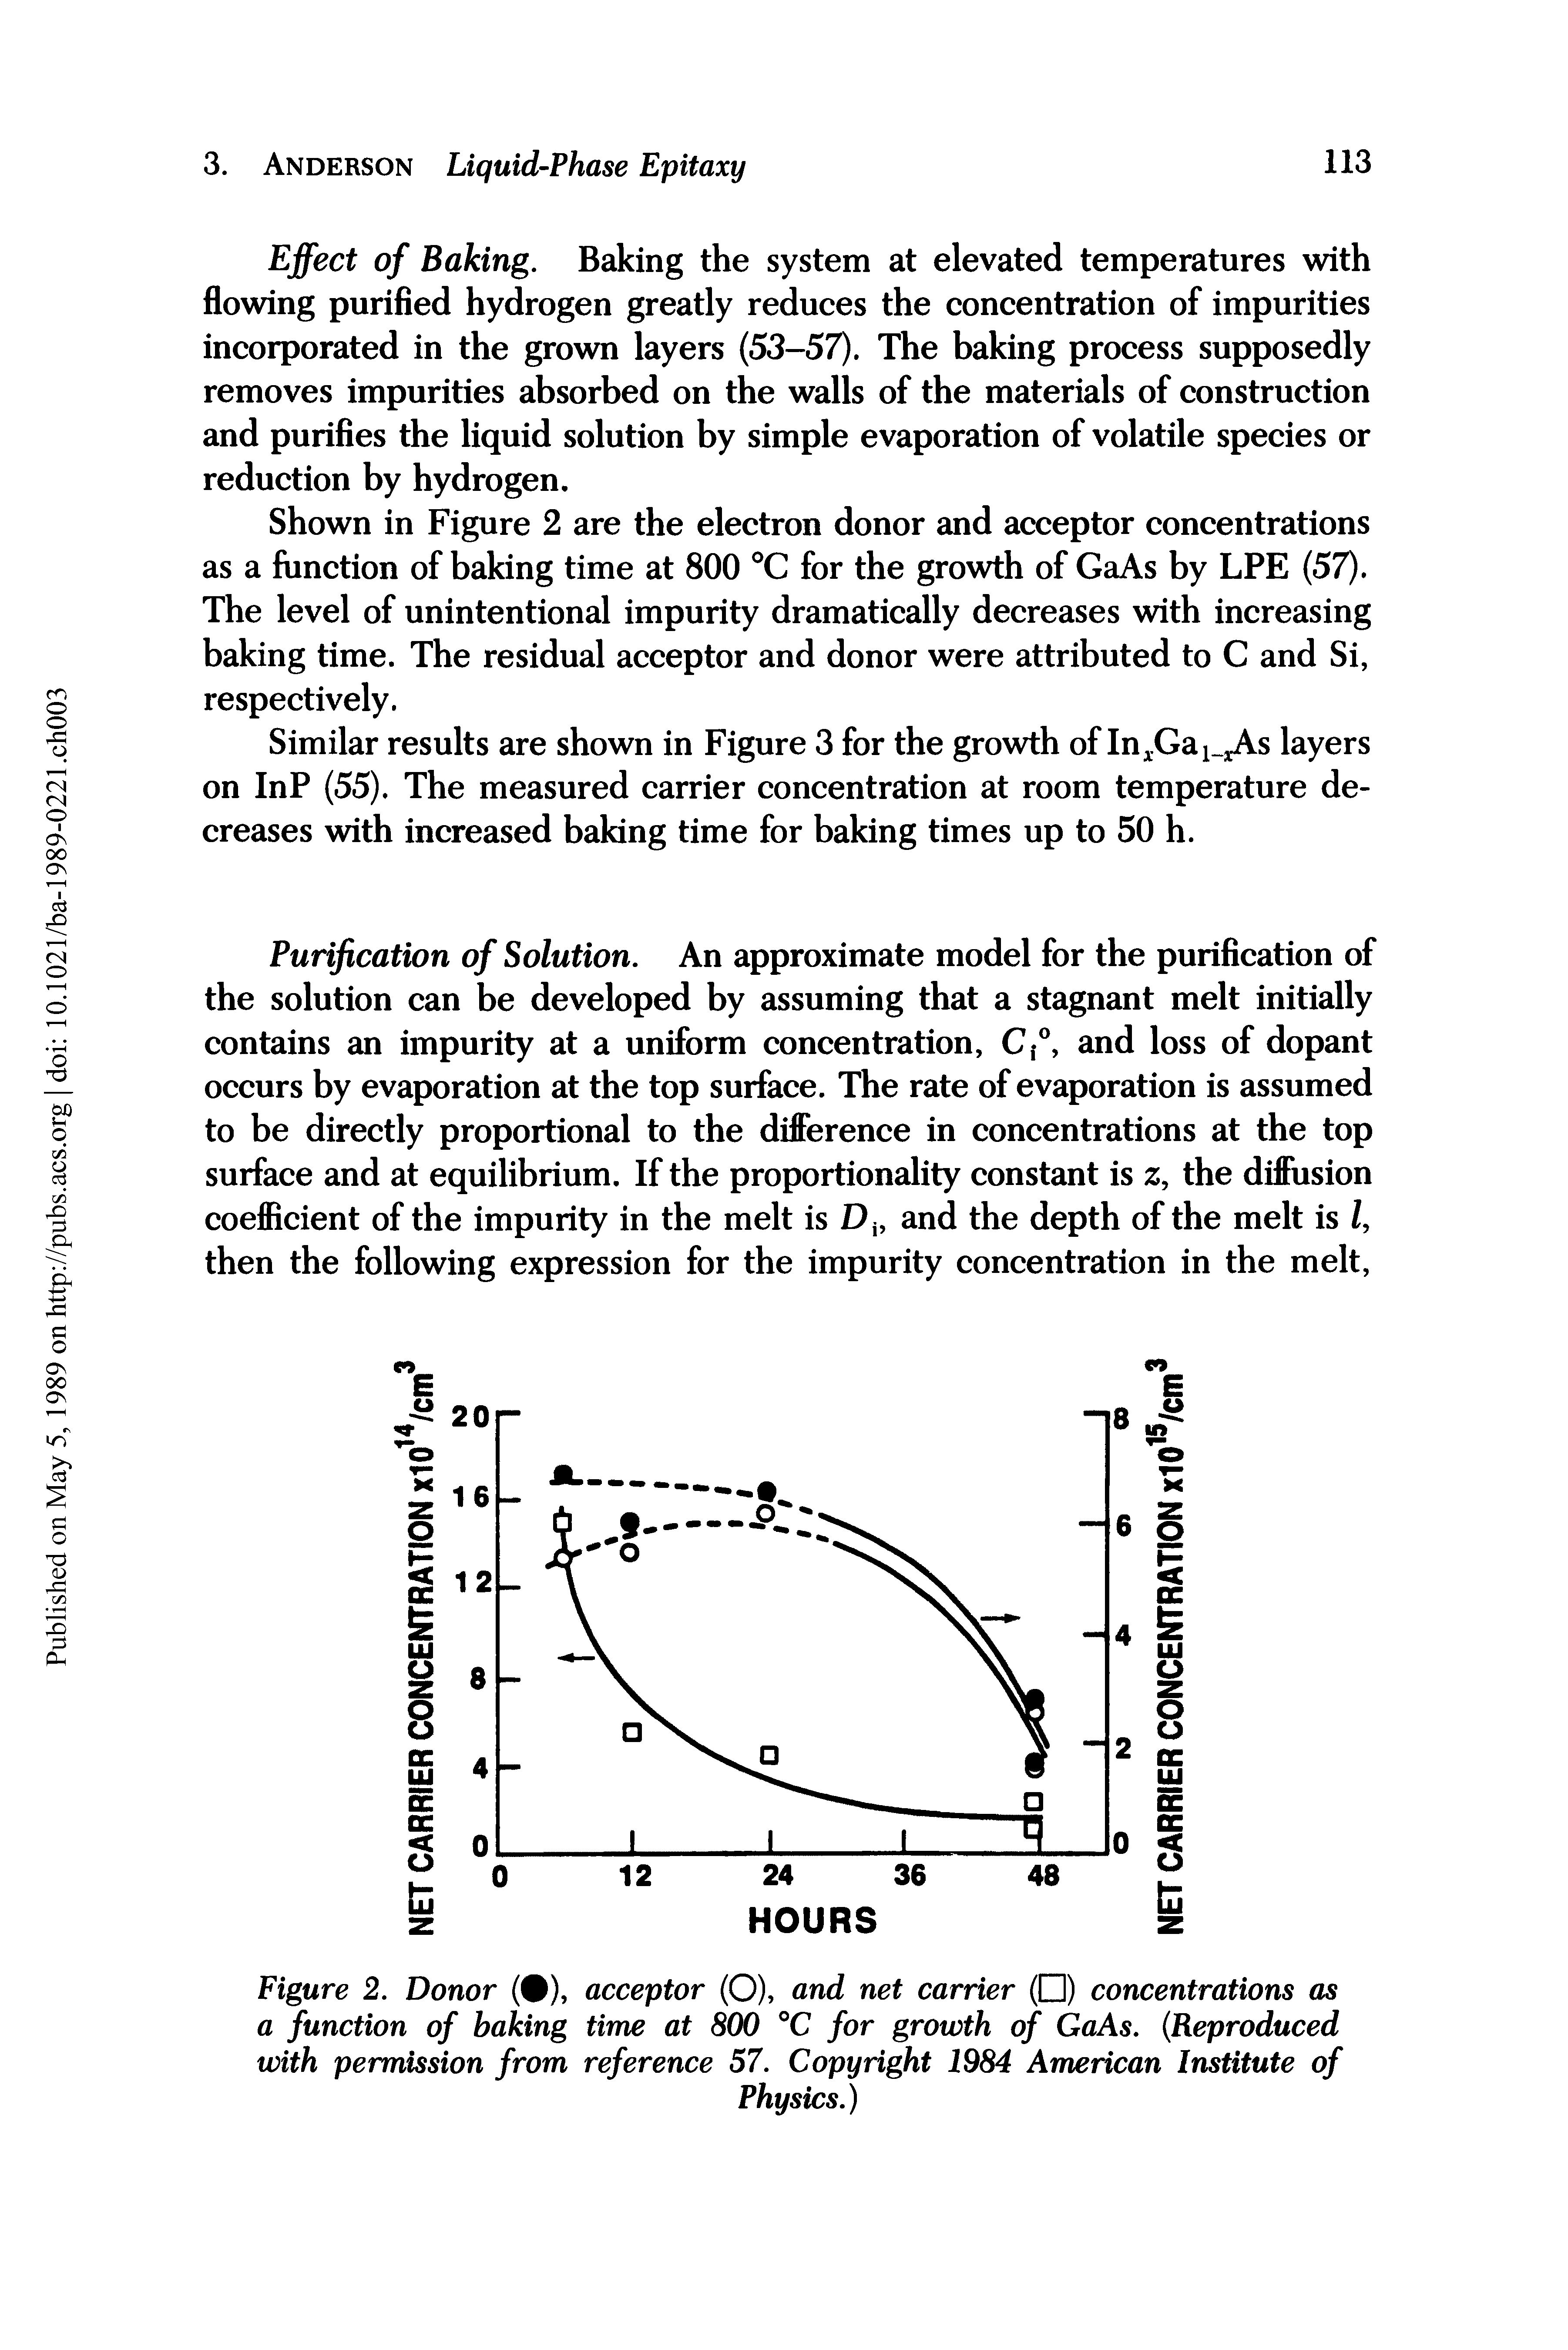 Figure 2. Donor ( ), acceptor (O), and net carrier ( ) concentrations as a function of baking time at 800 °C for growth of GaAs. (Reproduced with permission from reference 57. Copyright 1984 American Institute of...